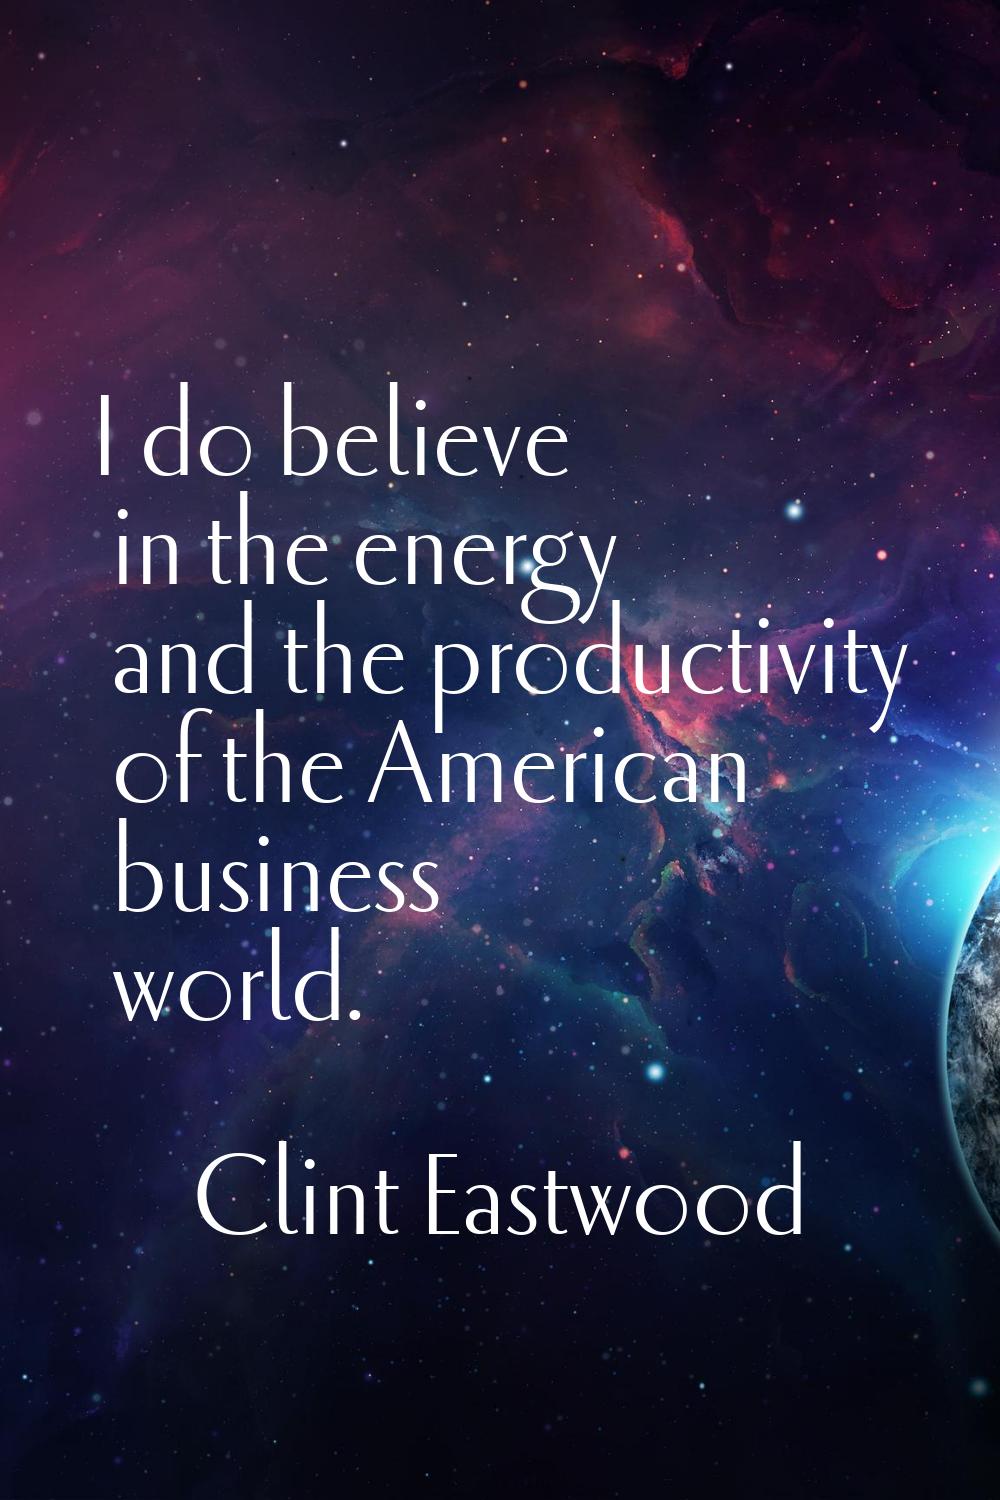 I do believe in the energy and the productivity of the American business world.